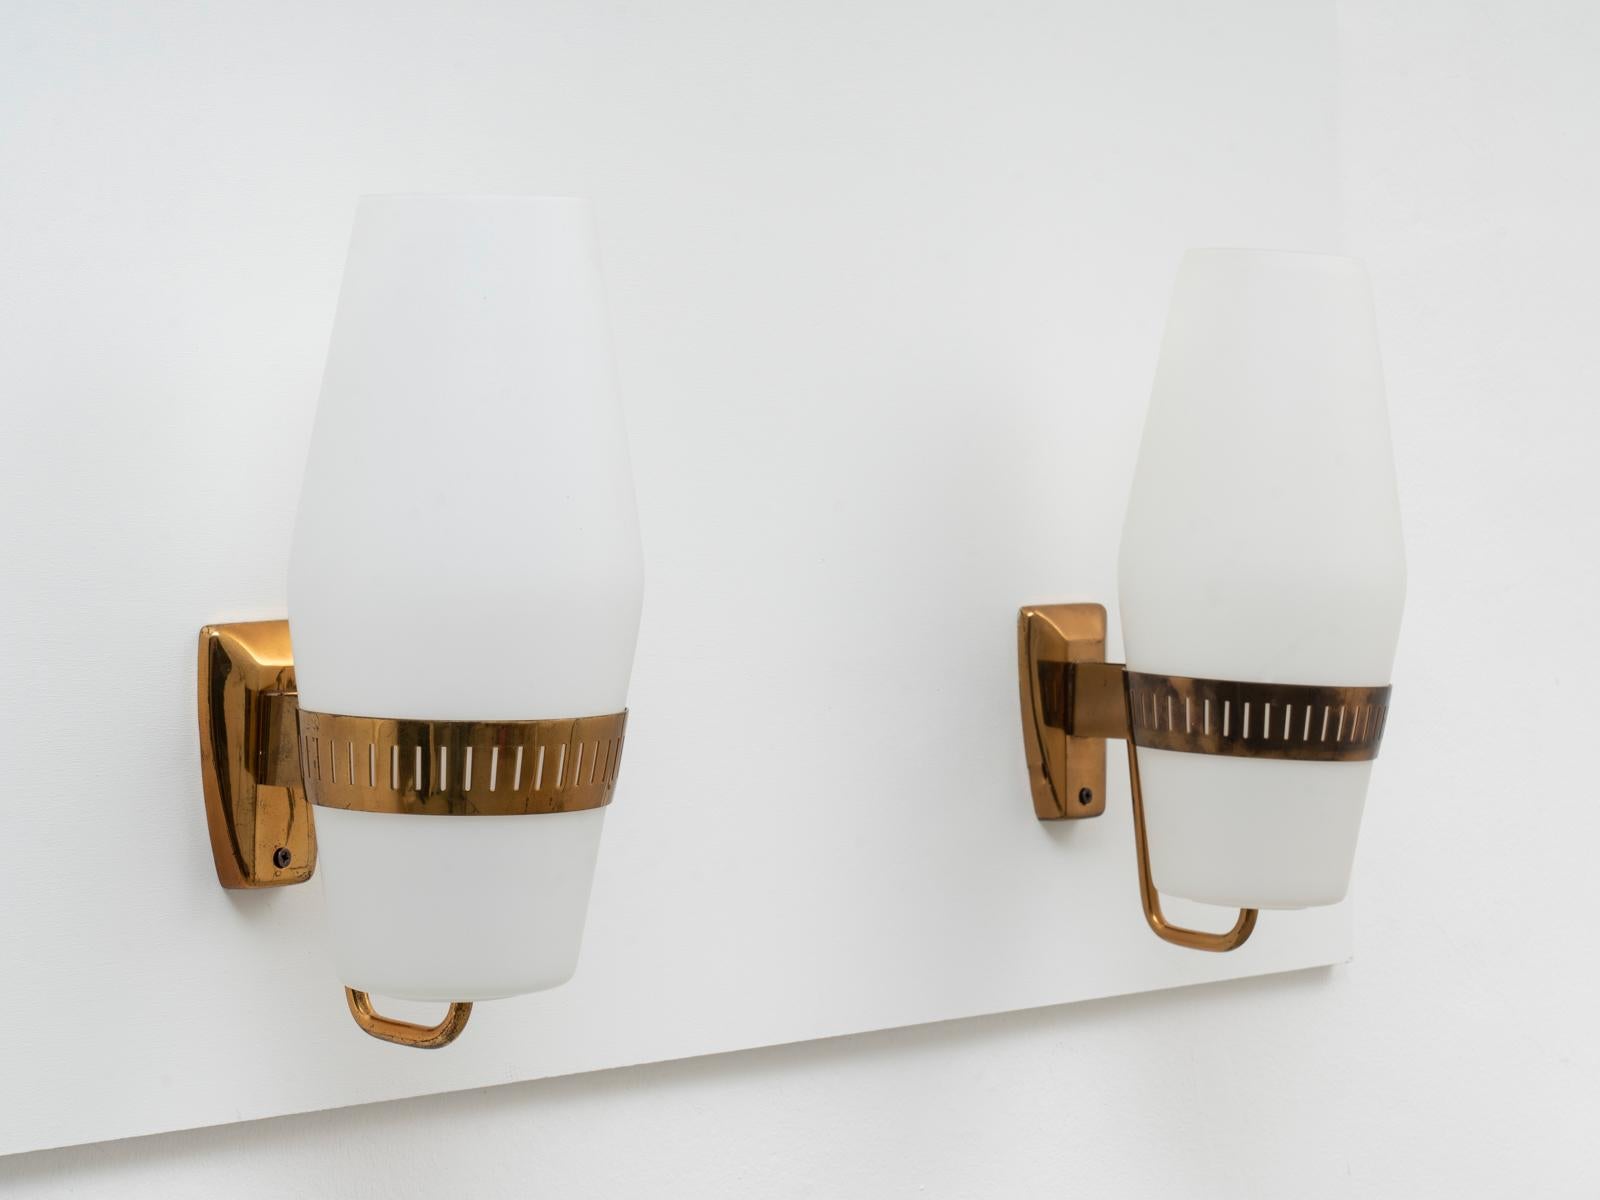 This pair of wall sconces was manufactured by Stilnovo in 1959 and no longer in production since decades. The model is documented as n. 2078. They are made of a solid brass structure and triplex-opaline glass shades. Both sconces are stamped